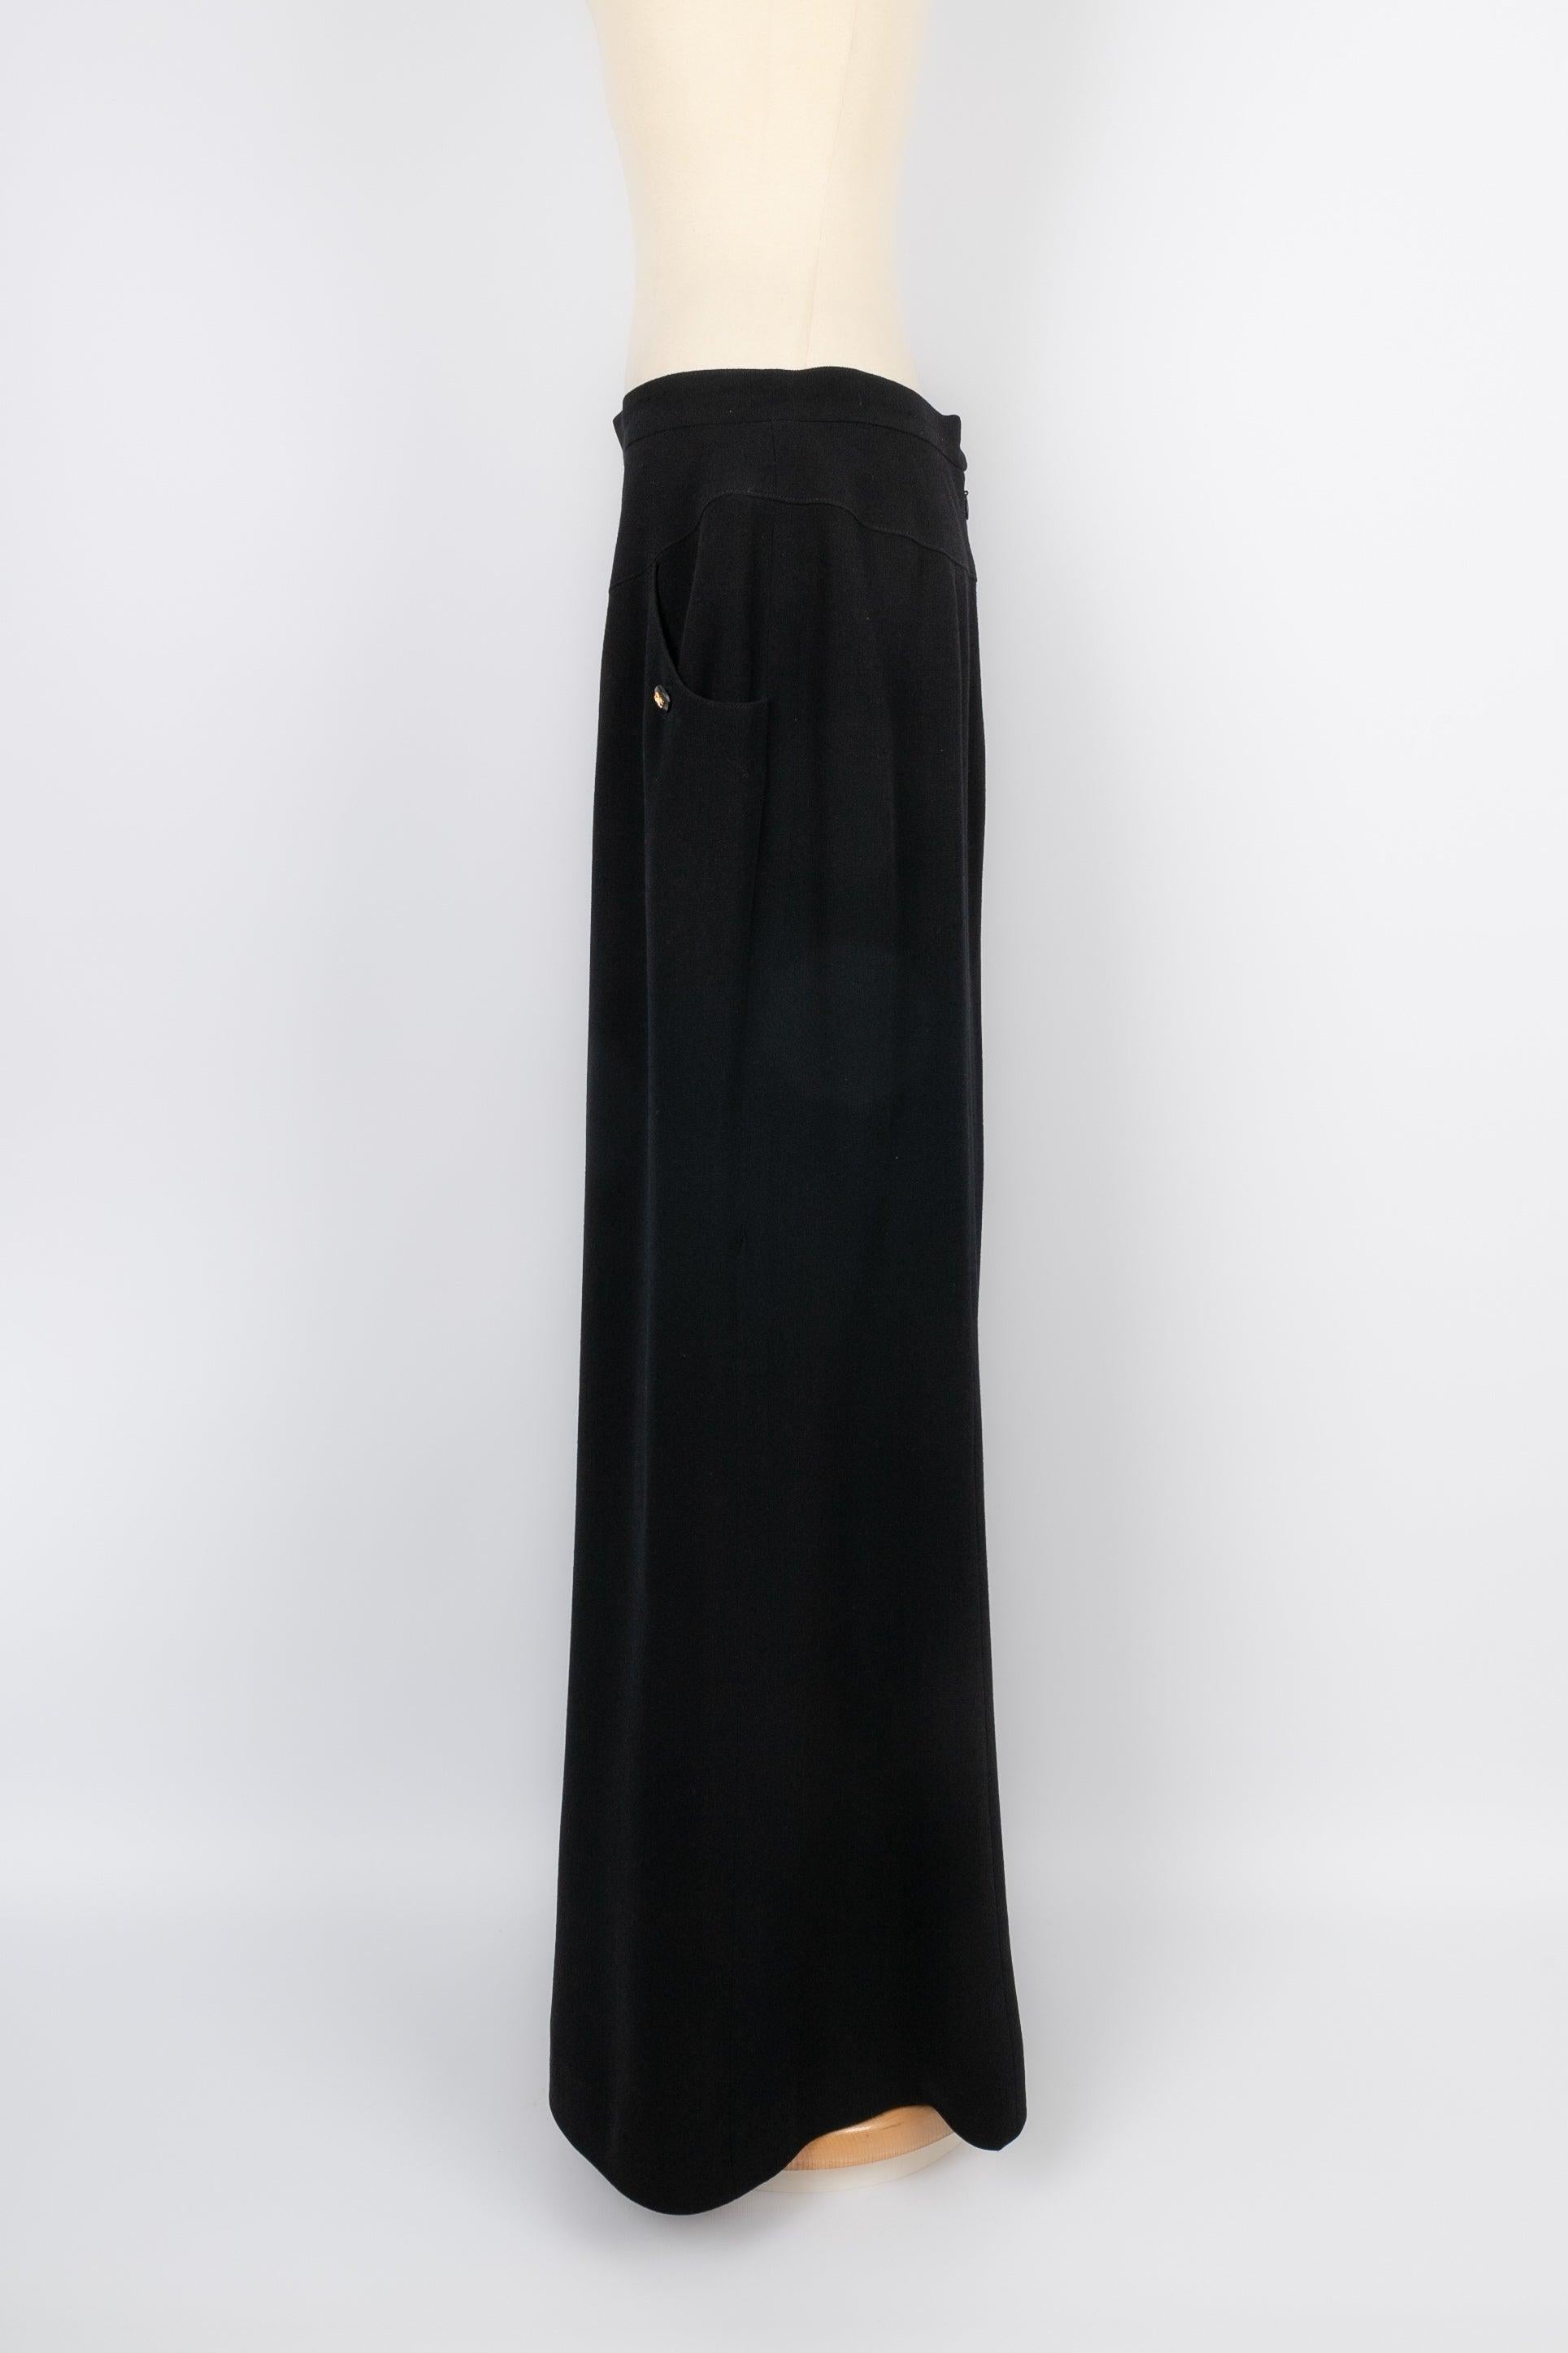 Chanel - (Made in France) Black wool long skirt split on the front. 44FR size. 1996 Fall-Winter Collection.

Additional information:
Condition: Very good condition
Dimensions: Waist: 41 cm - Hips: 54 cm - Length: 105 cm
Period: 20th Century

Seller